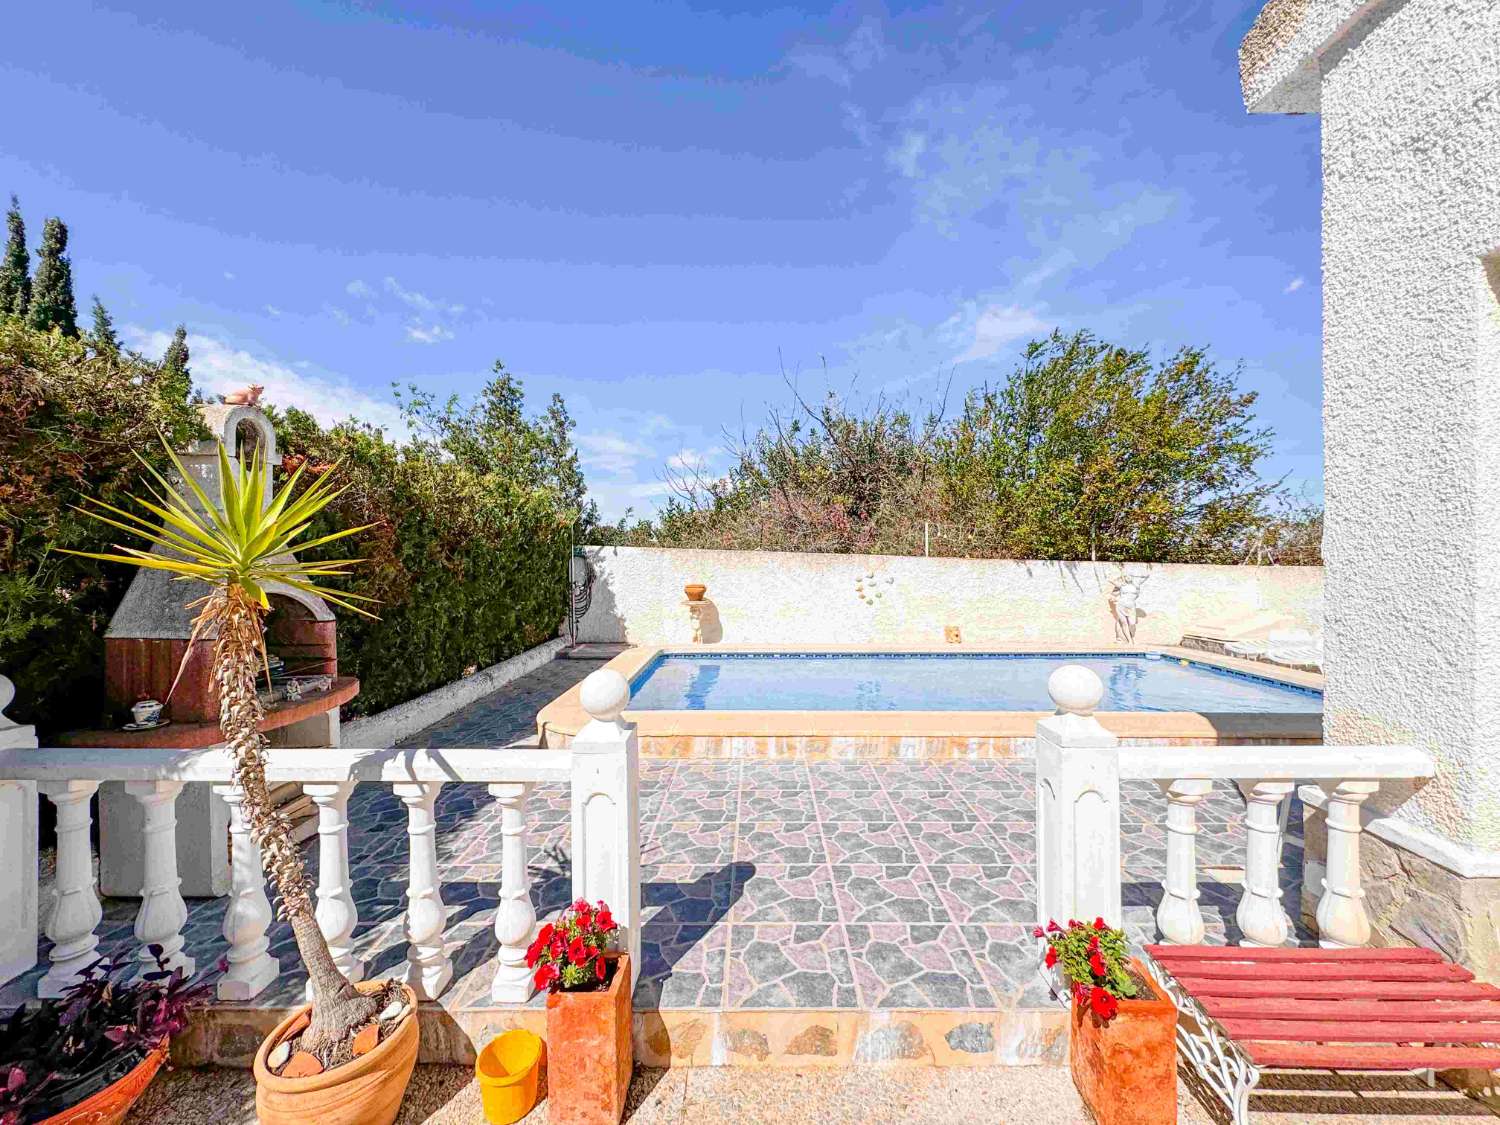 SEMI-DETACHED VILLA WITH PRIVATE POOL AND GARAGE IN URB. THE BALCONIES